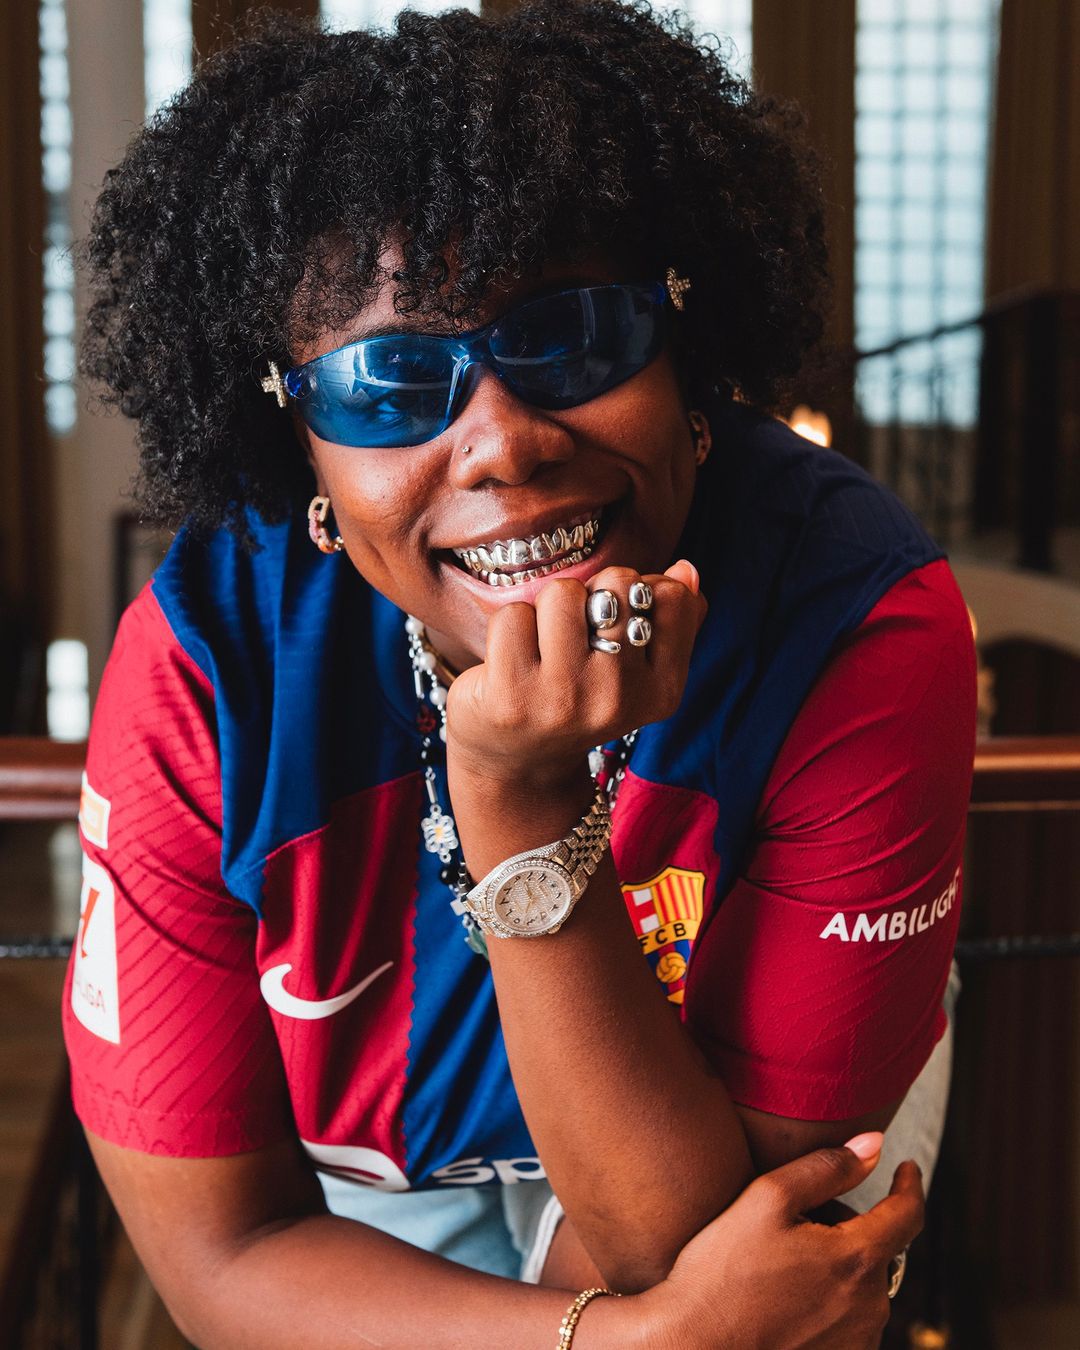 Barcelona put out a collaboration with Nigerian singer, songwriter, and entertainer Teniola Apata, professionally known as Teni The Entertainer. X/Barcelona